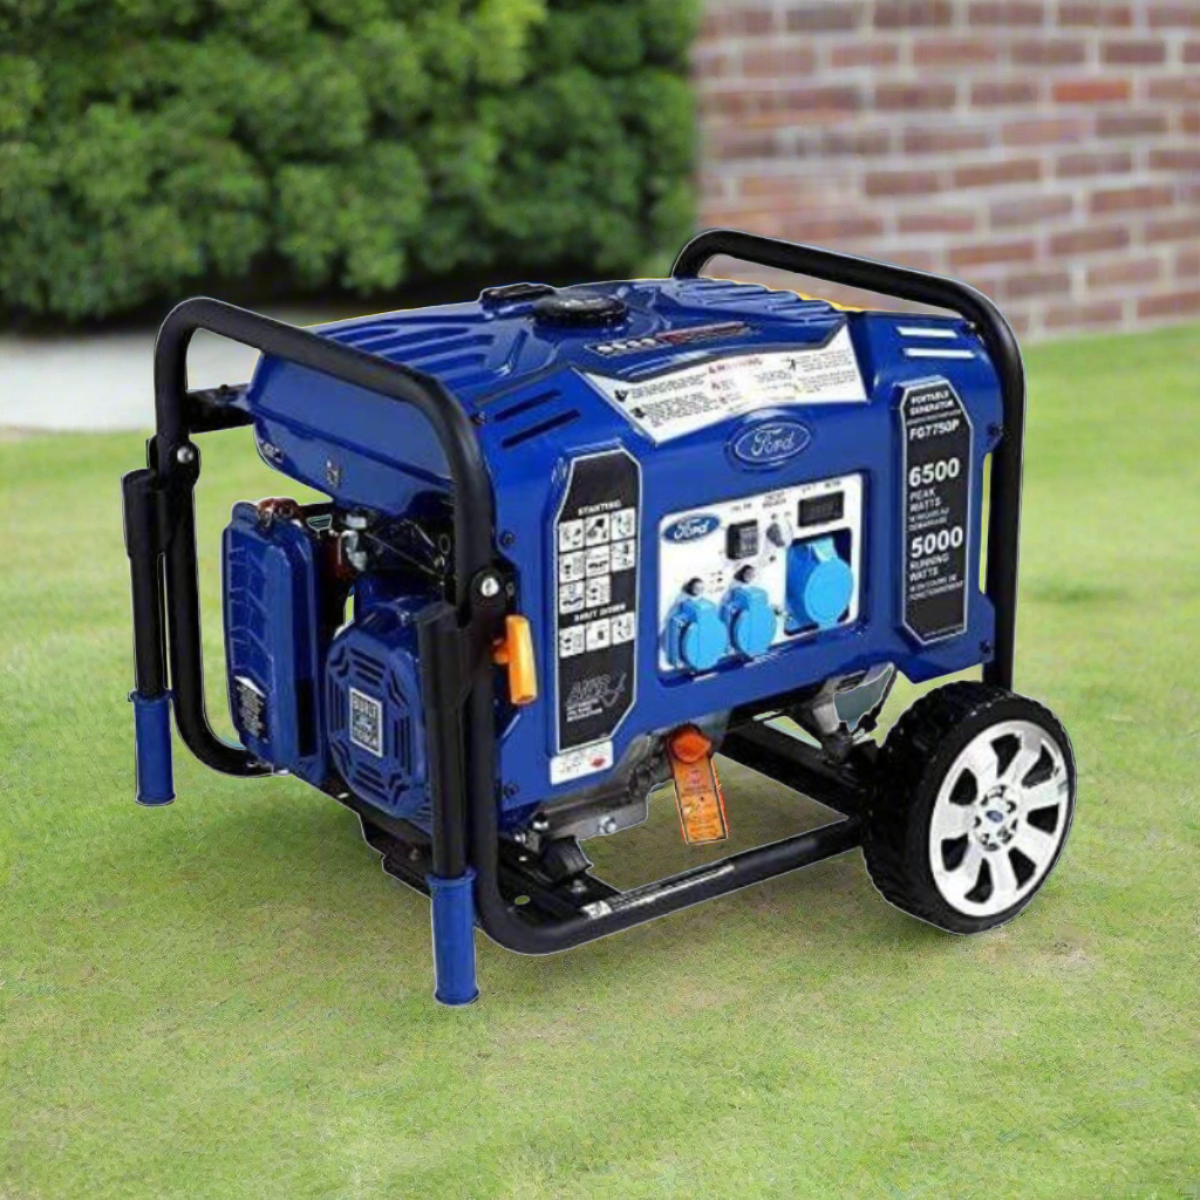 Ford Portable Gasoline Generator 6500W Peak 5000W with Electric Start - FG7750P supply-master